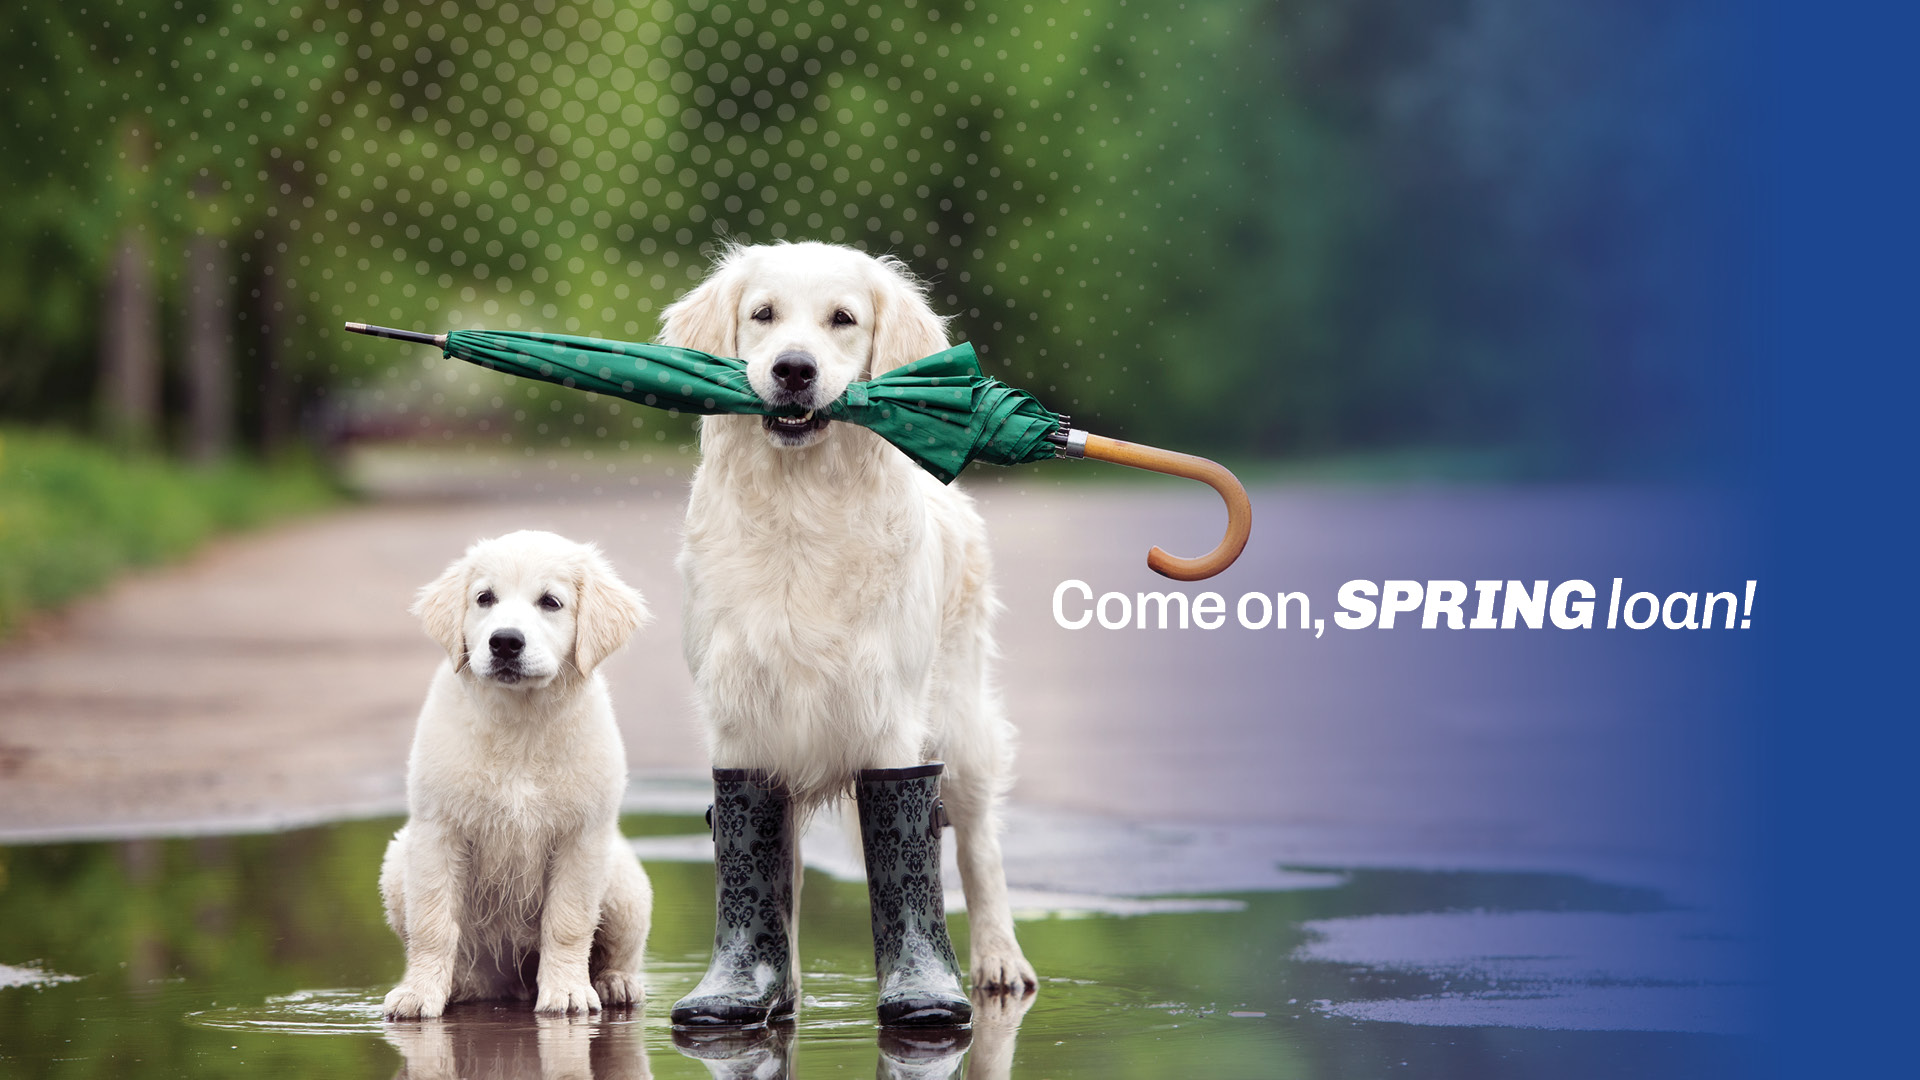 Dog holding umbrella in his mouth "Come On, Spring"